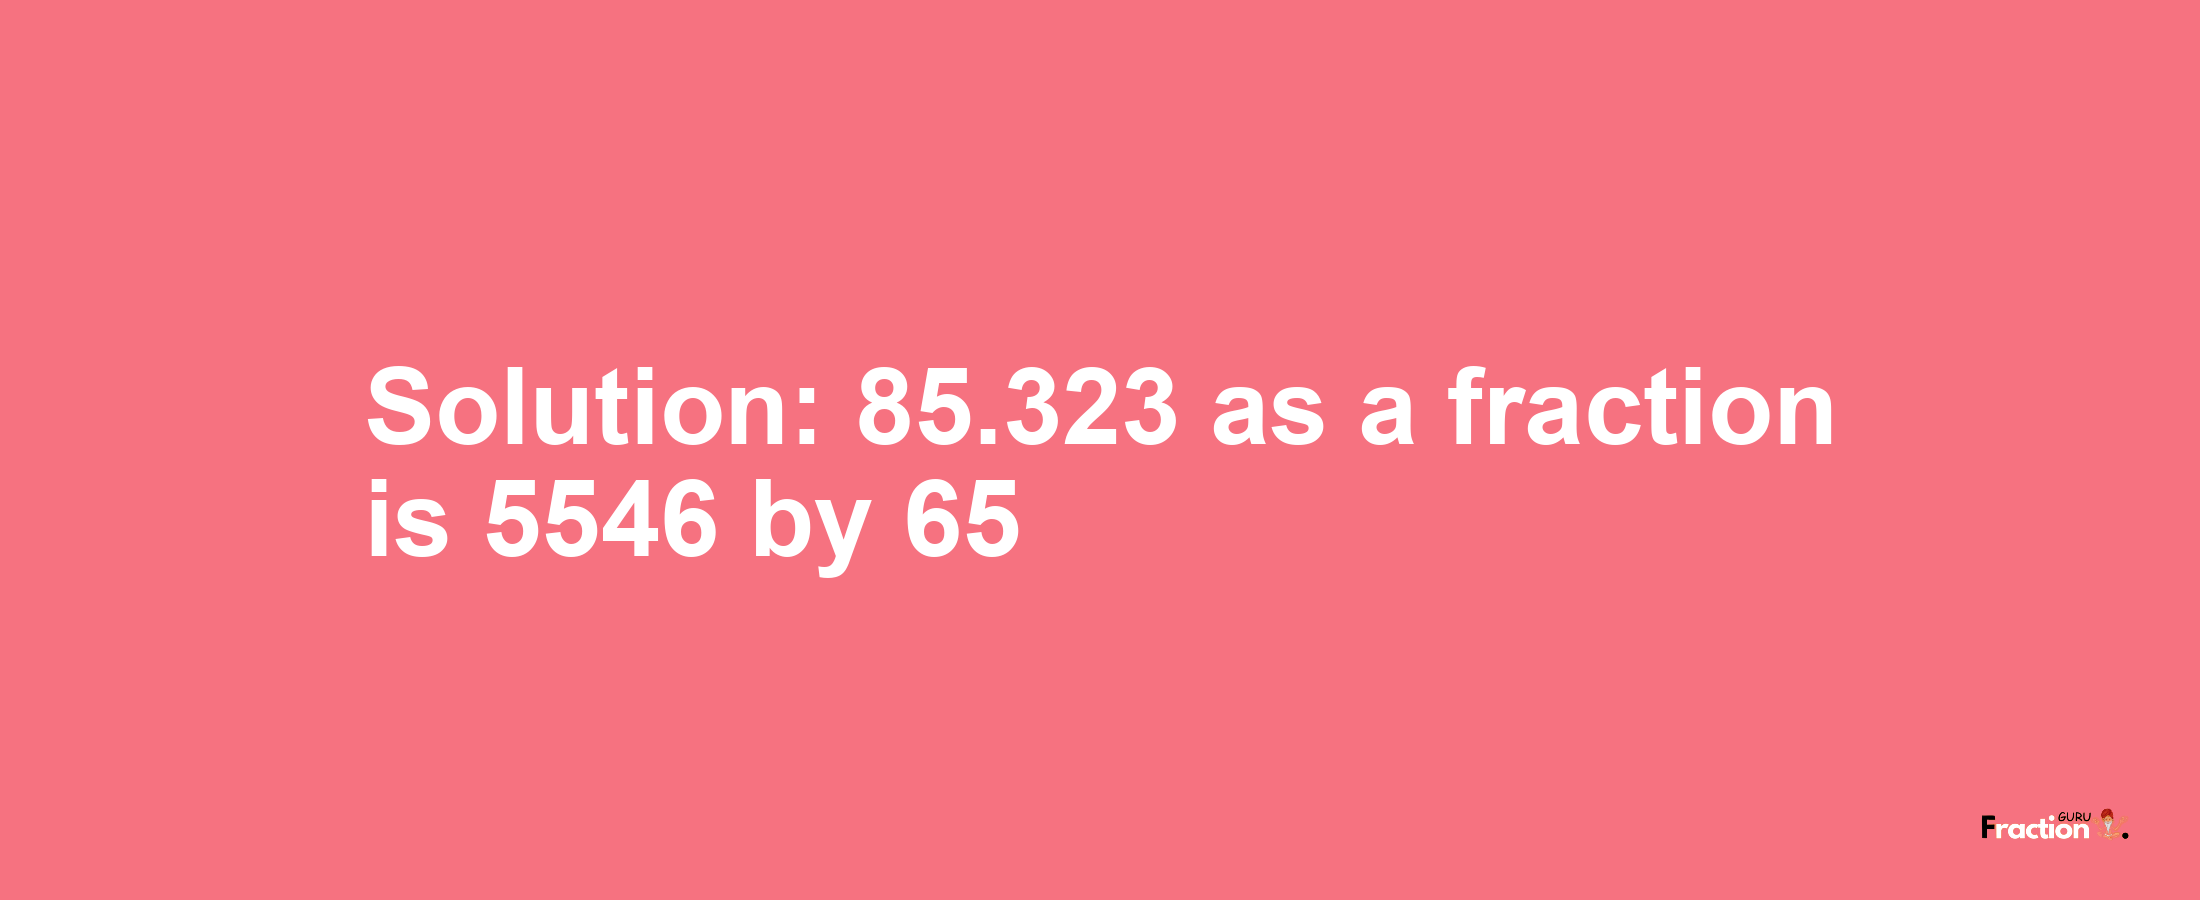 Solution:85.323 as a fraction is 5546/65